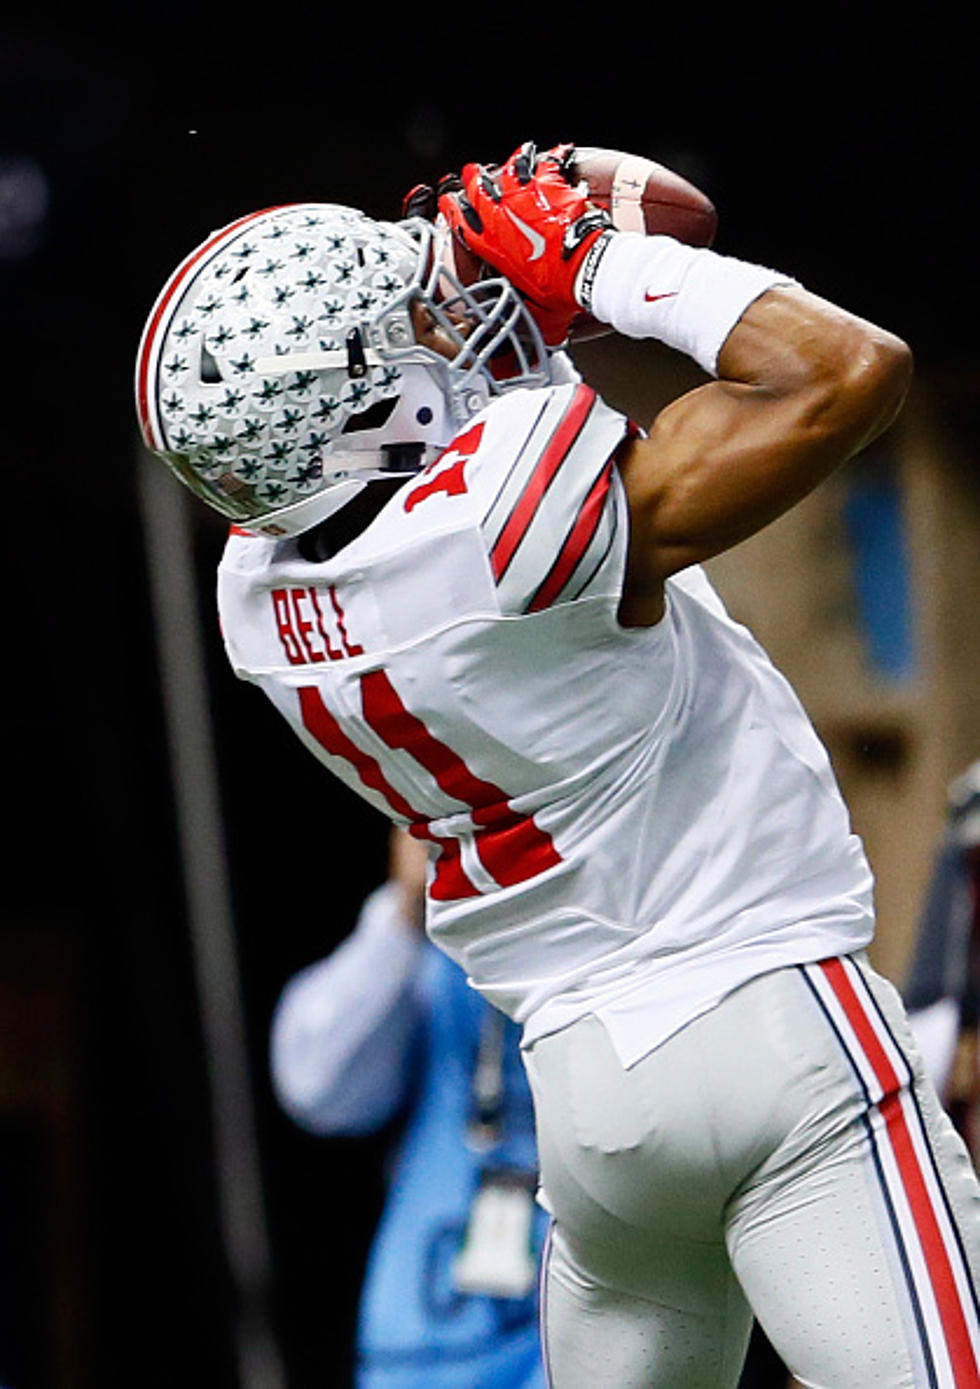 Saints Trade Up, Select DB Vonn Bell 61st Overall [VIDEO]